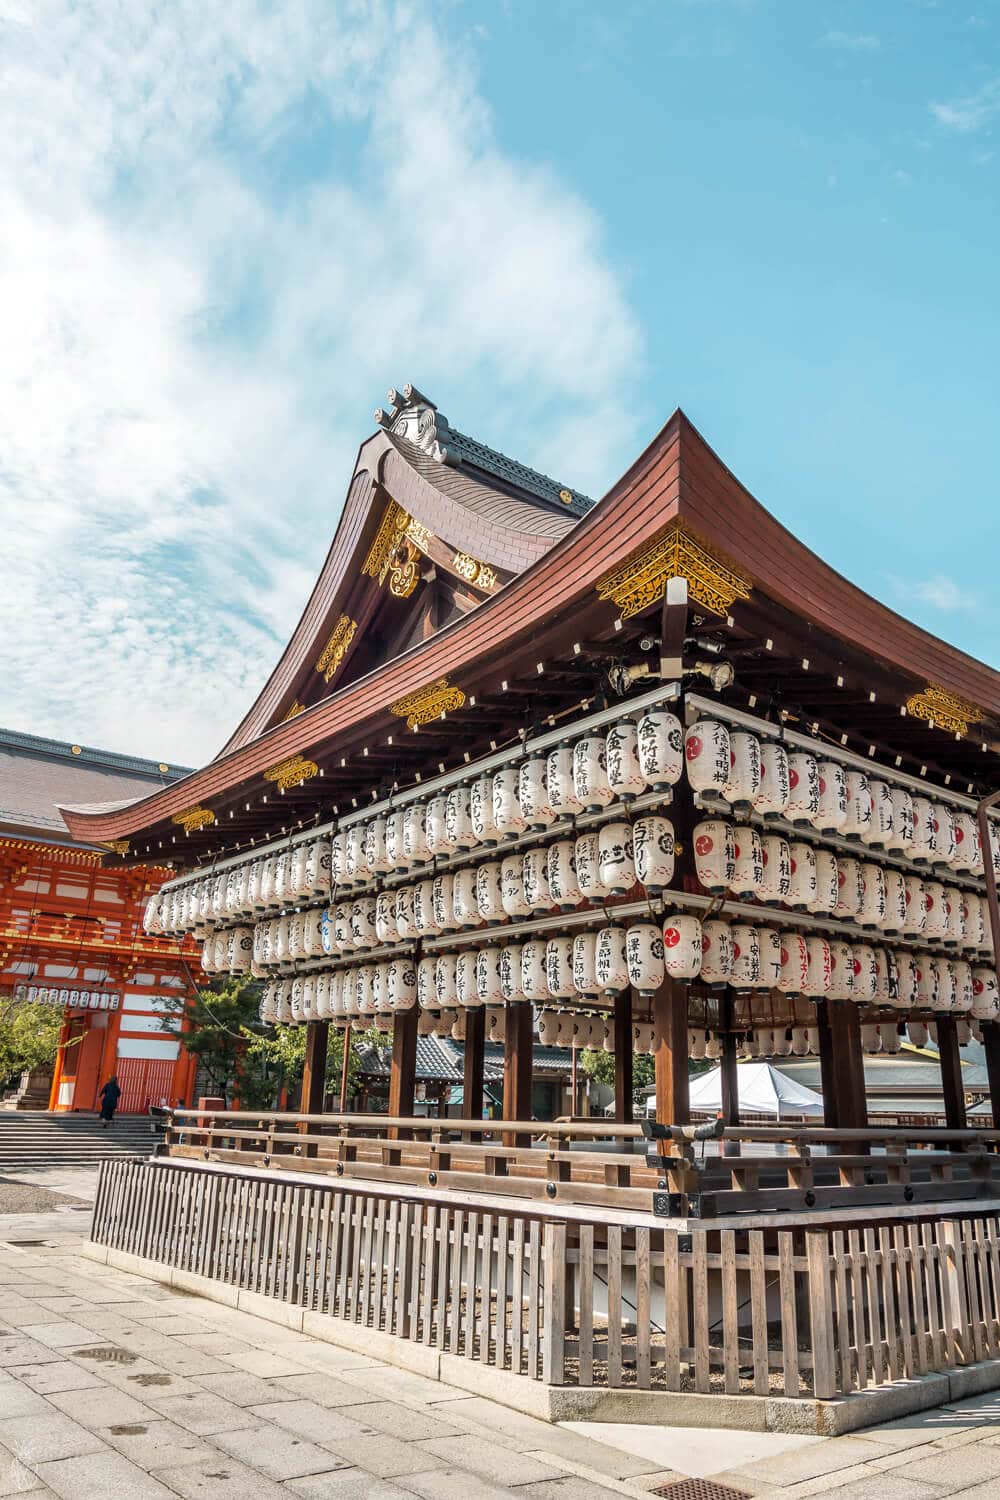 20 Photos to Inspire You to Visit Kyoto Japan